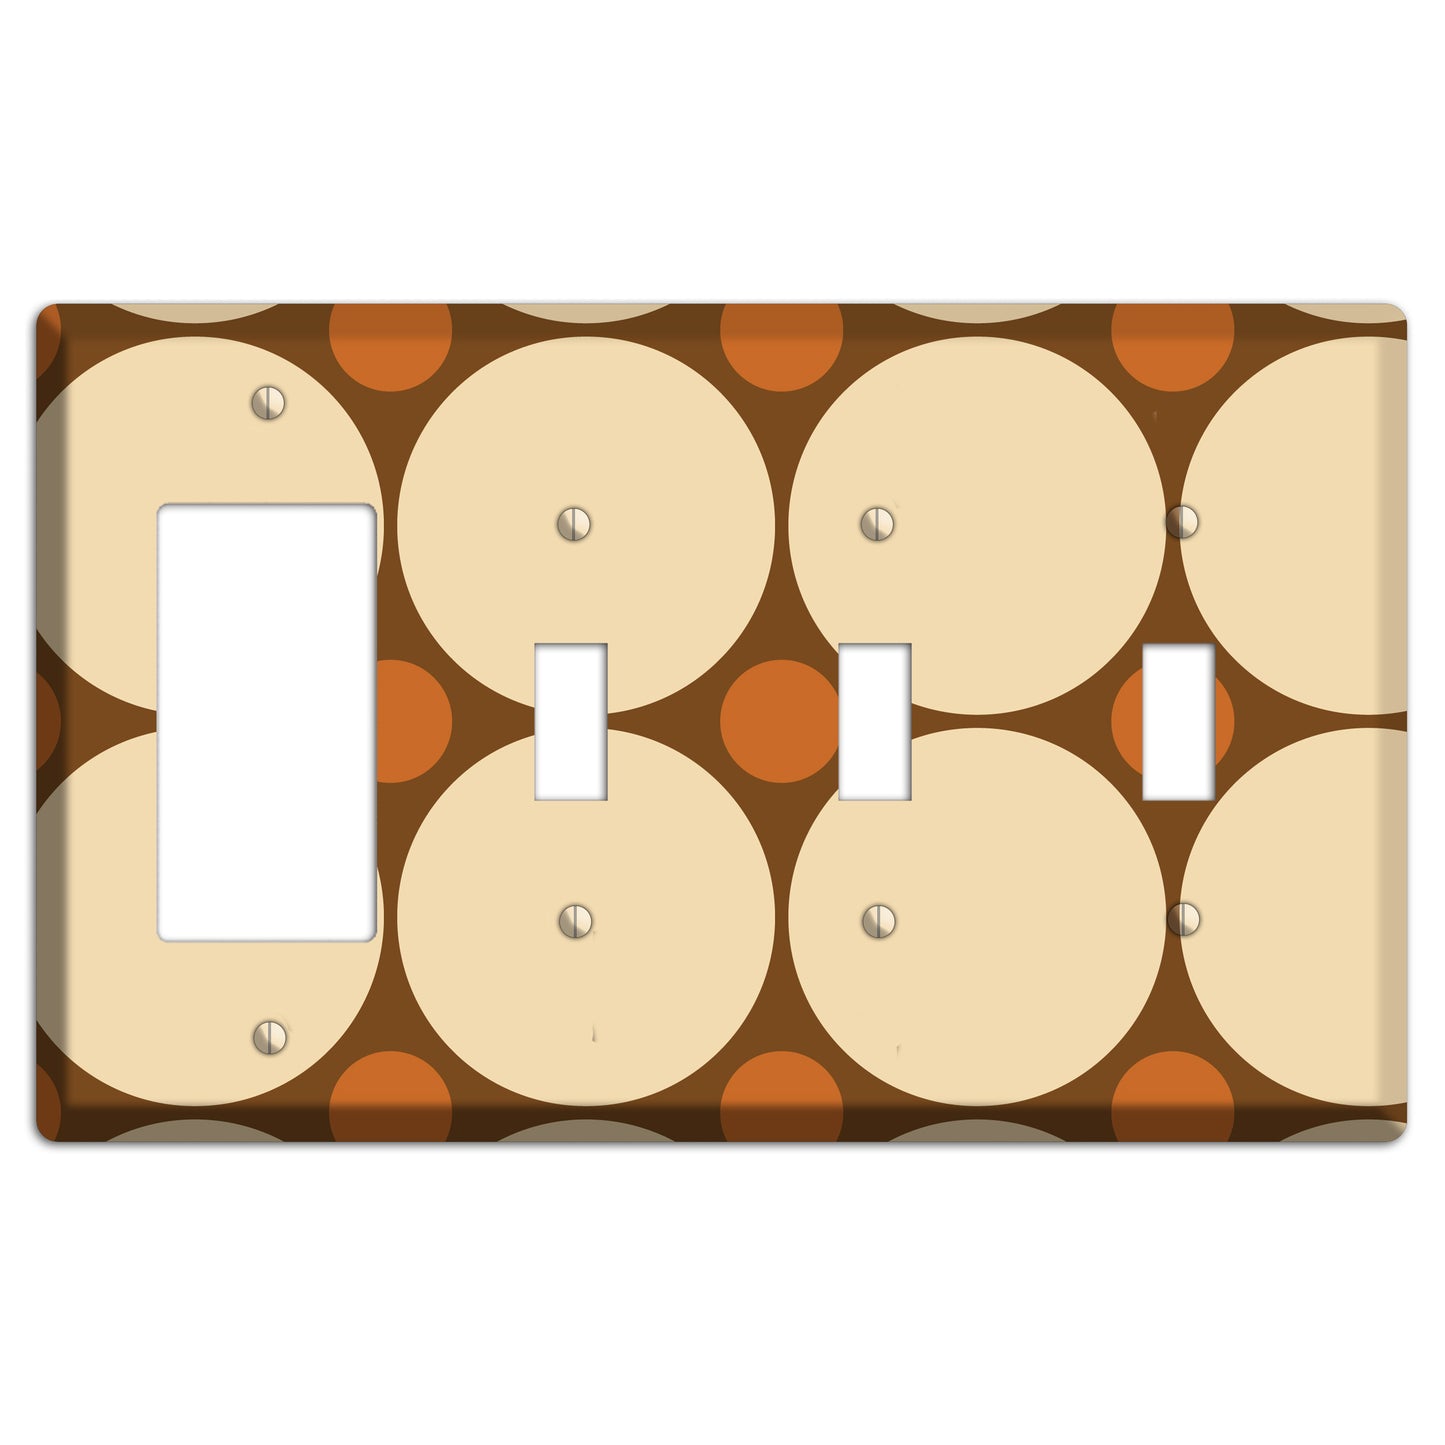 Brown with Beige and Umber Multi Tiled Large Dots Rocker / 3 Toggle Wallplate